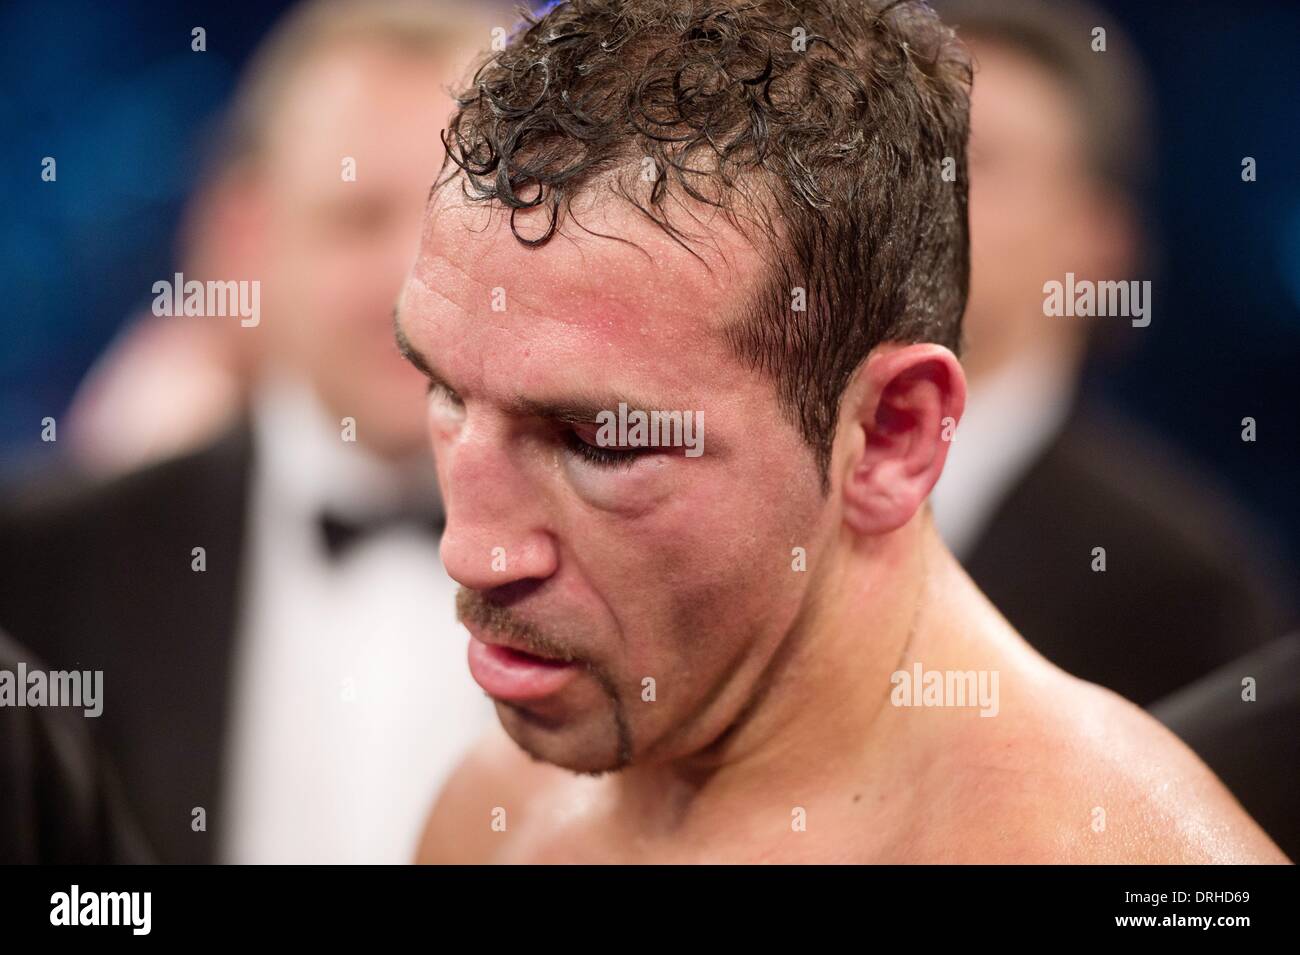 Stuttgart, Germany. 26th Jan, 2014. German boxer Firat Arslan reacts after loosing against Marco Huck in their World boxing Organization (WBO) Cruiserweight Championship match at Schleyer Hall in Stuttgart, Germany, 26 January 2014. Firat Arslan lost by technical k.o. in the sixth round. Photo: SEBASTIAN KAHNERT/dpa/Alamy Live News Stock Photo